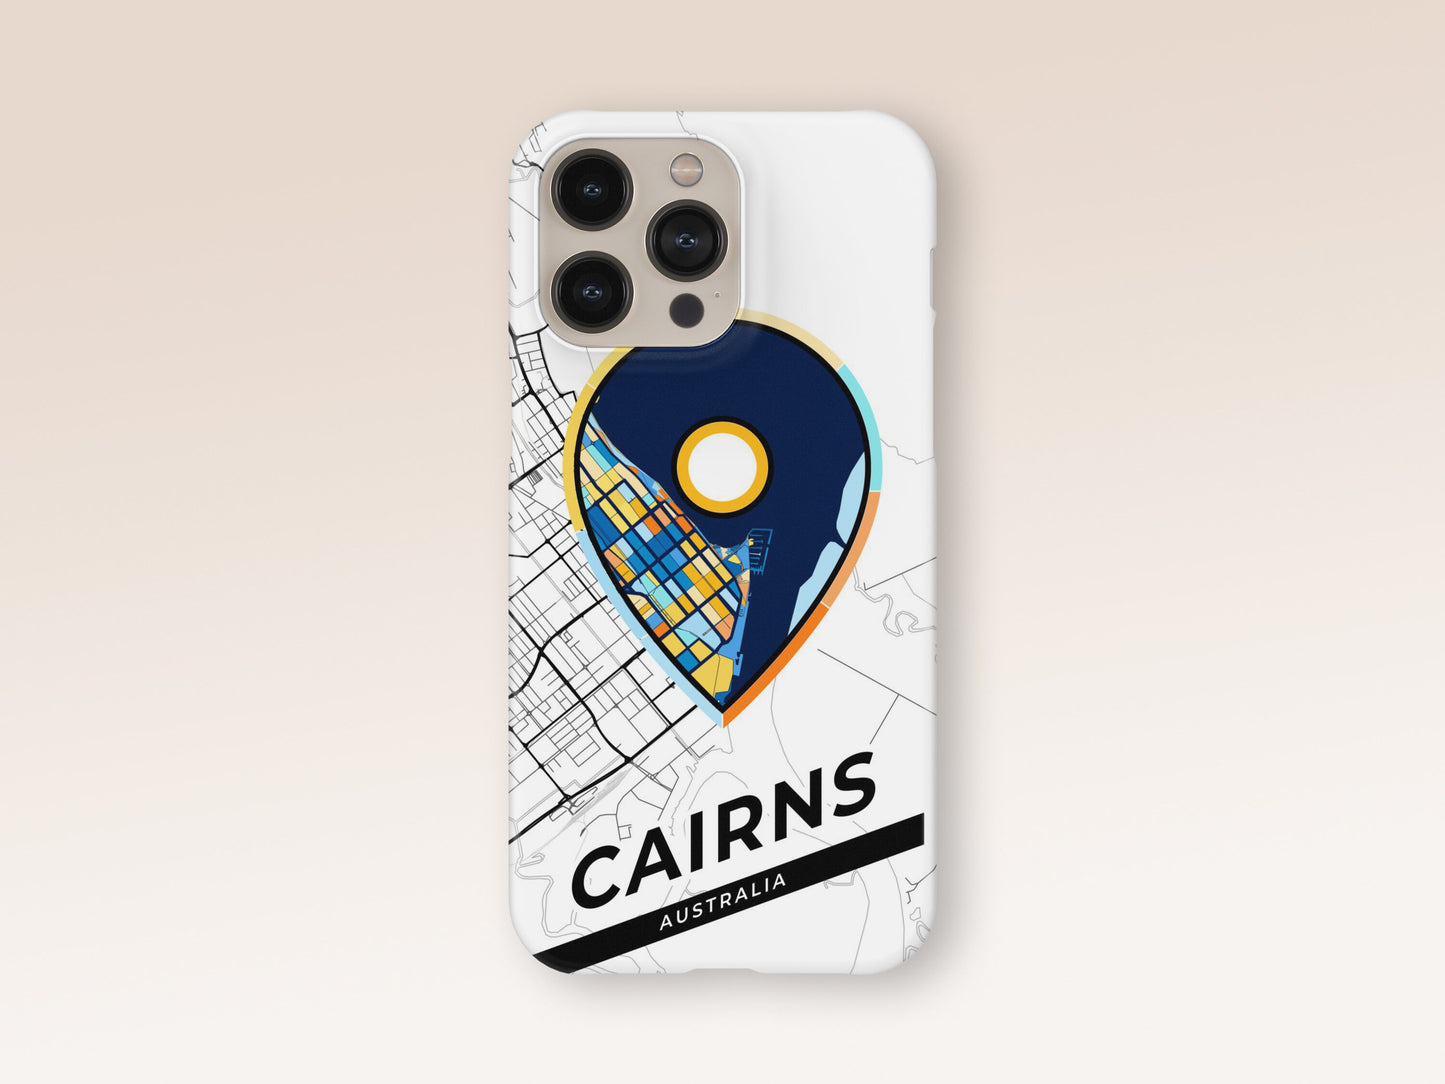 Cairns Australia slim phone case with colorful icon. Birthday, wedding or housewarming gift. Couple match cases. 1